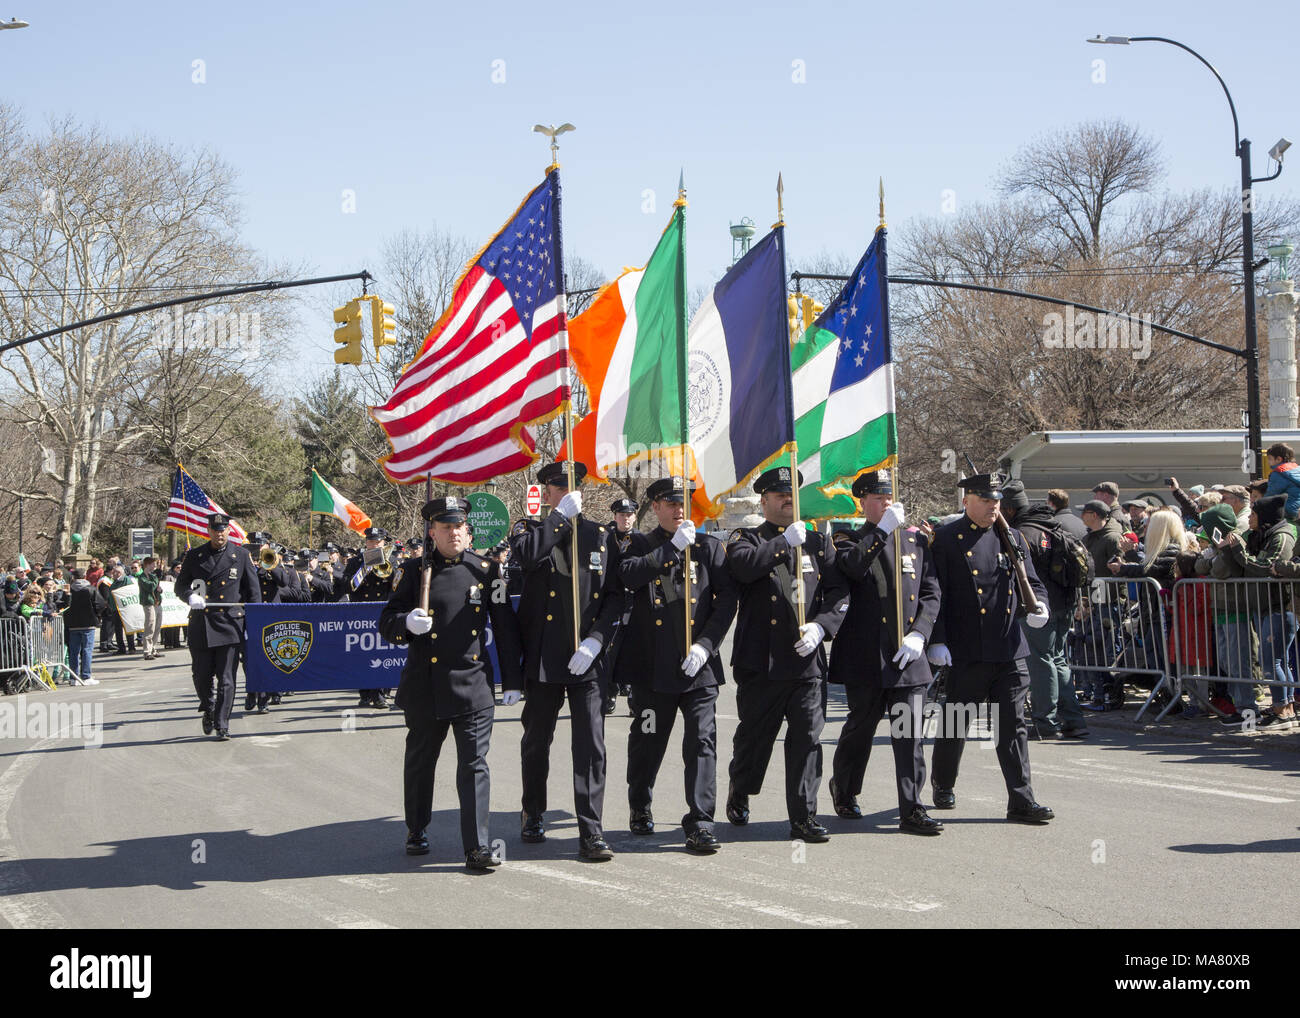 St. Patrick's Day Parade in Park SLope, Brooklyn, NY. Police officers